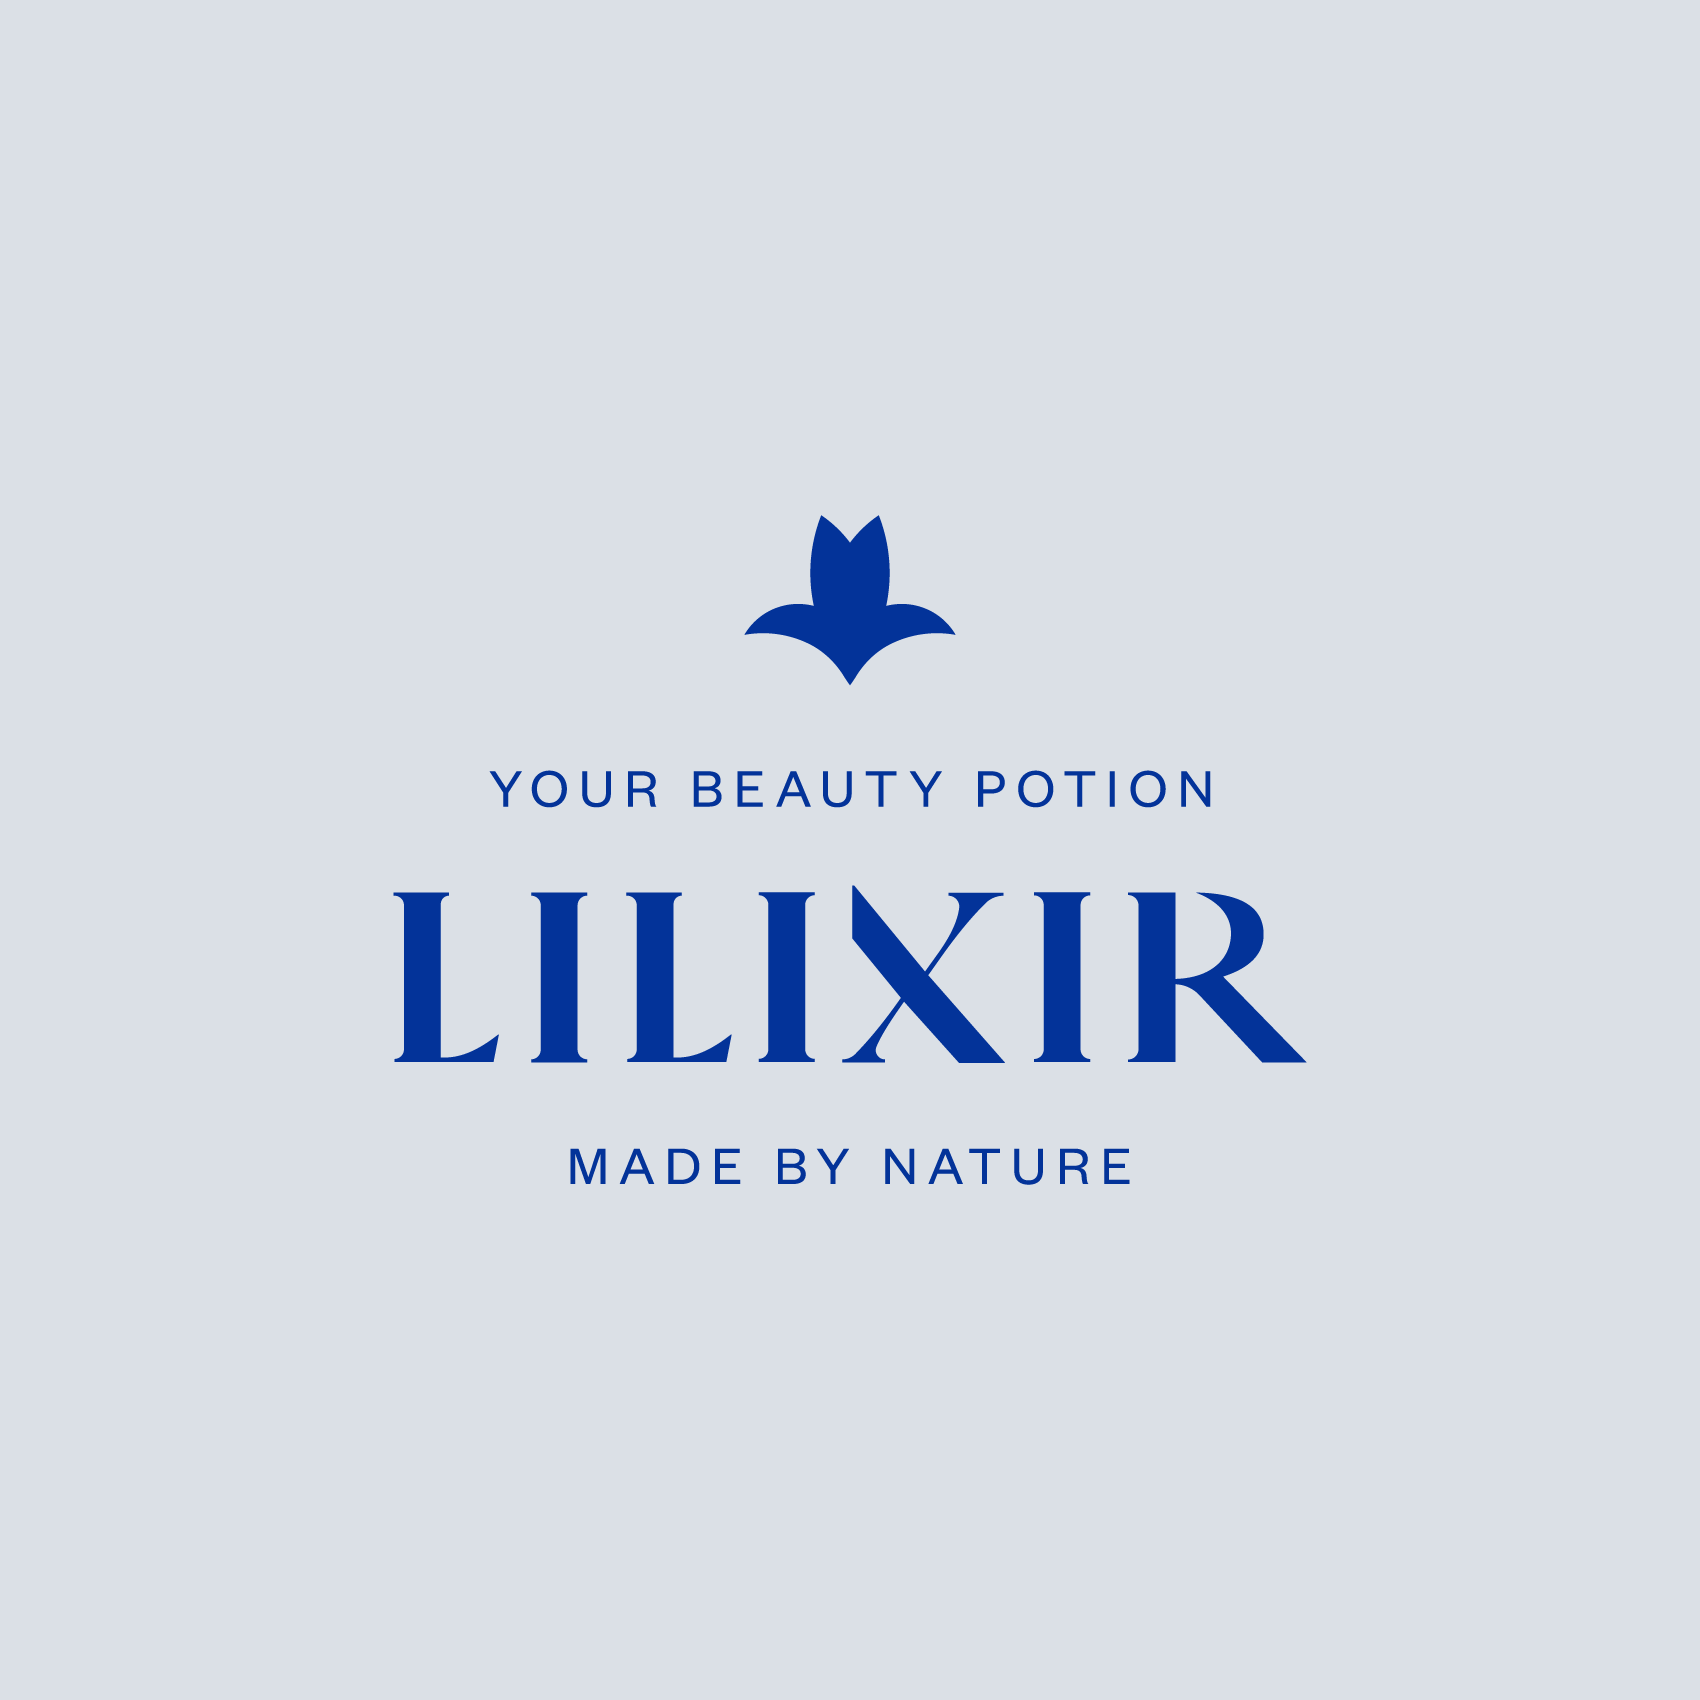 Let's Connect on Social Media - Join LILIXIR Beauty Community